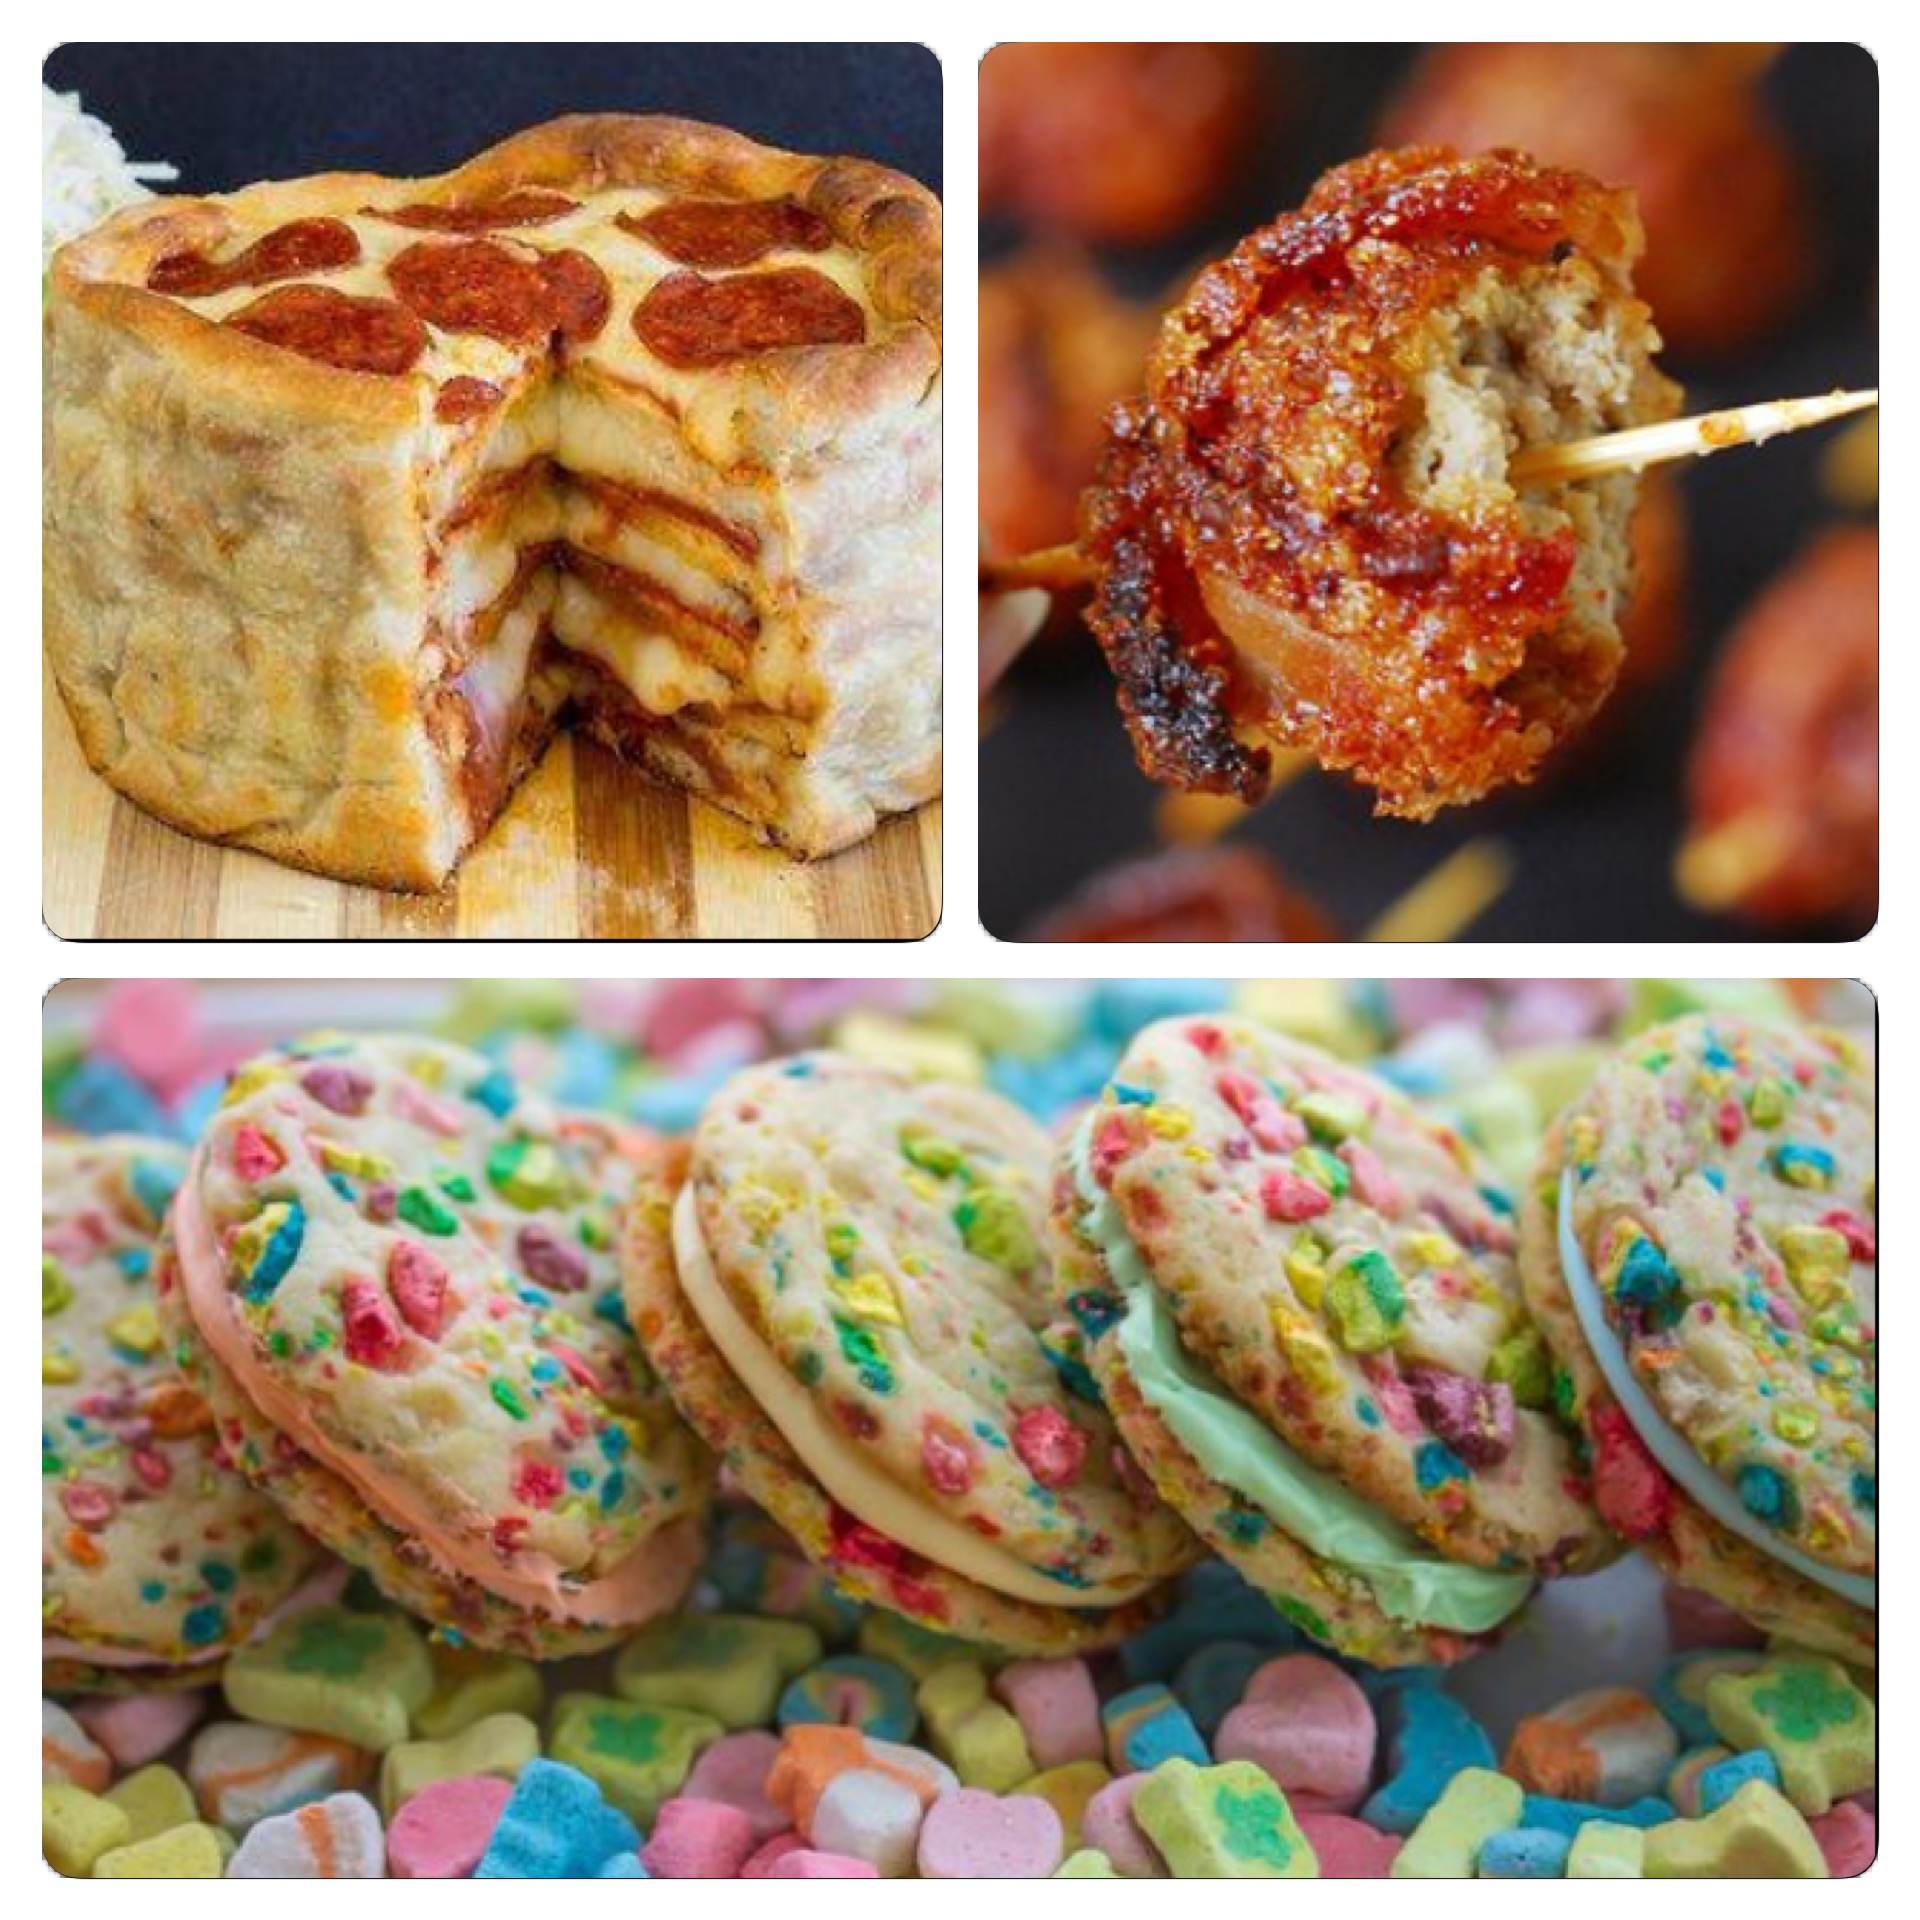 Oh how I would love for Sidney to cook bacon wrapped meatballs, Lucky Charm cookie sandwiches, and pizza cake!